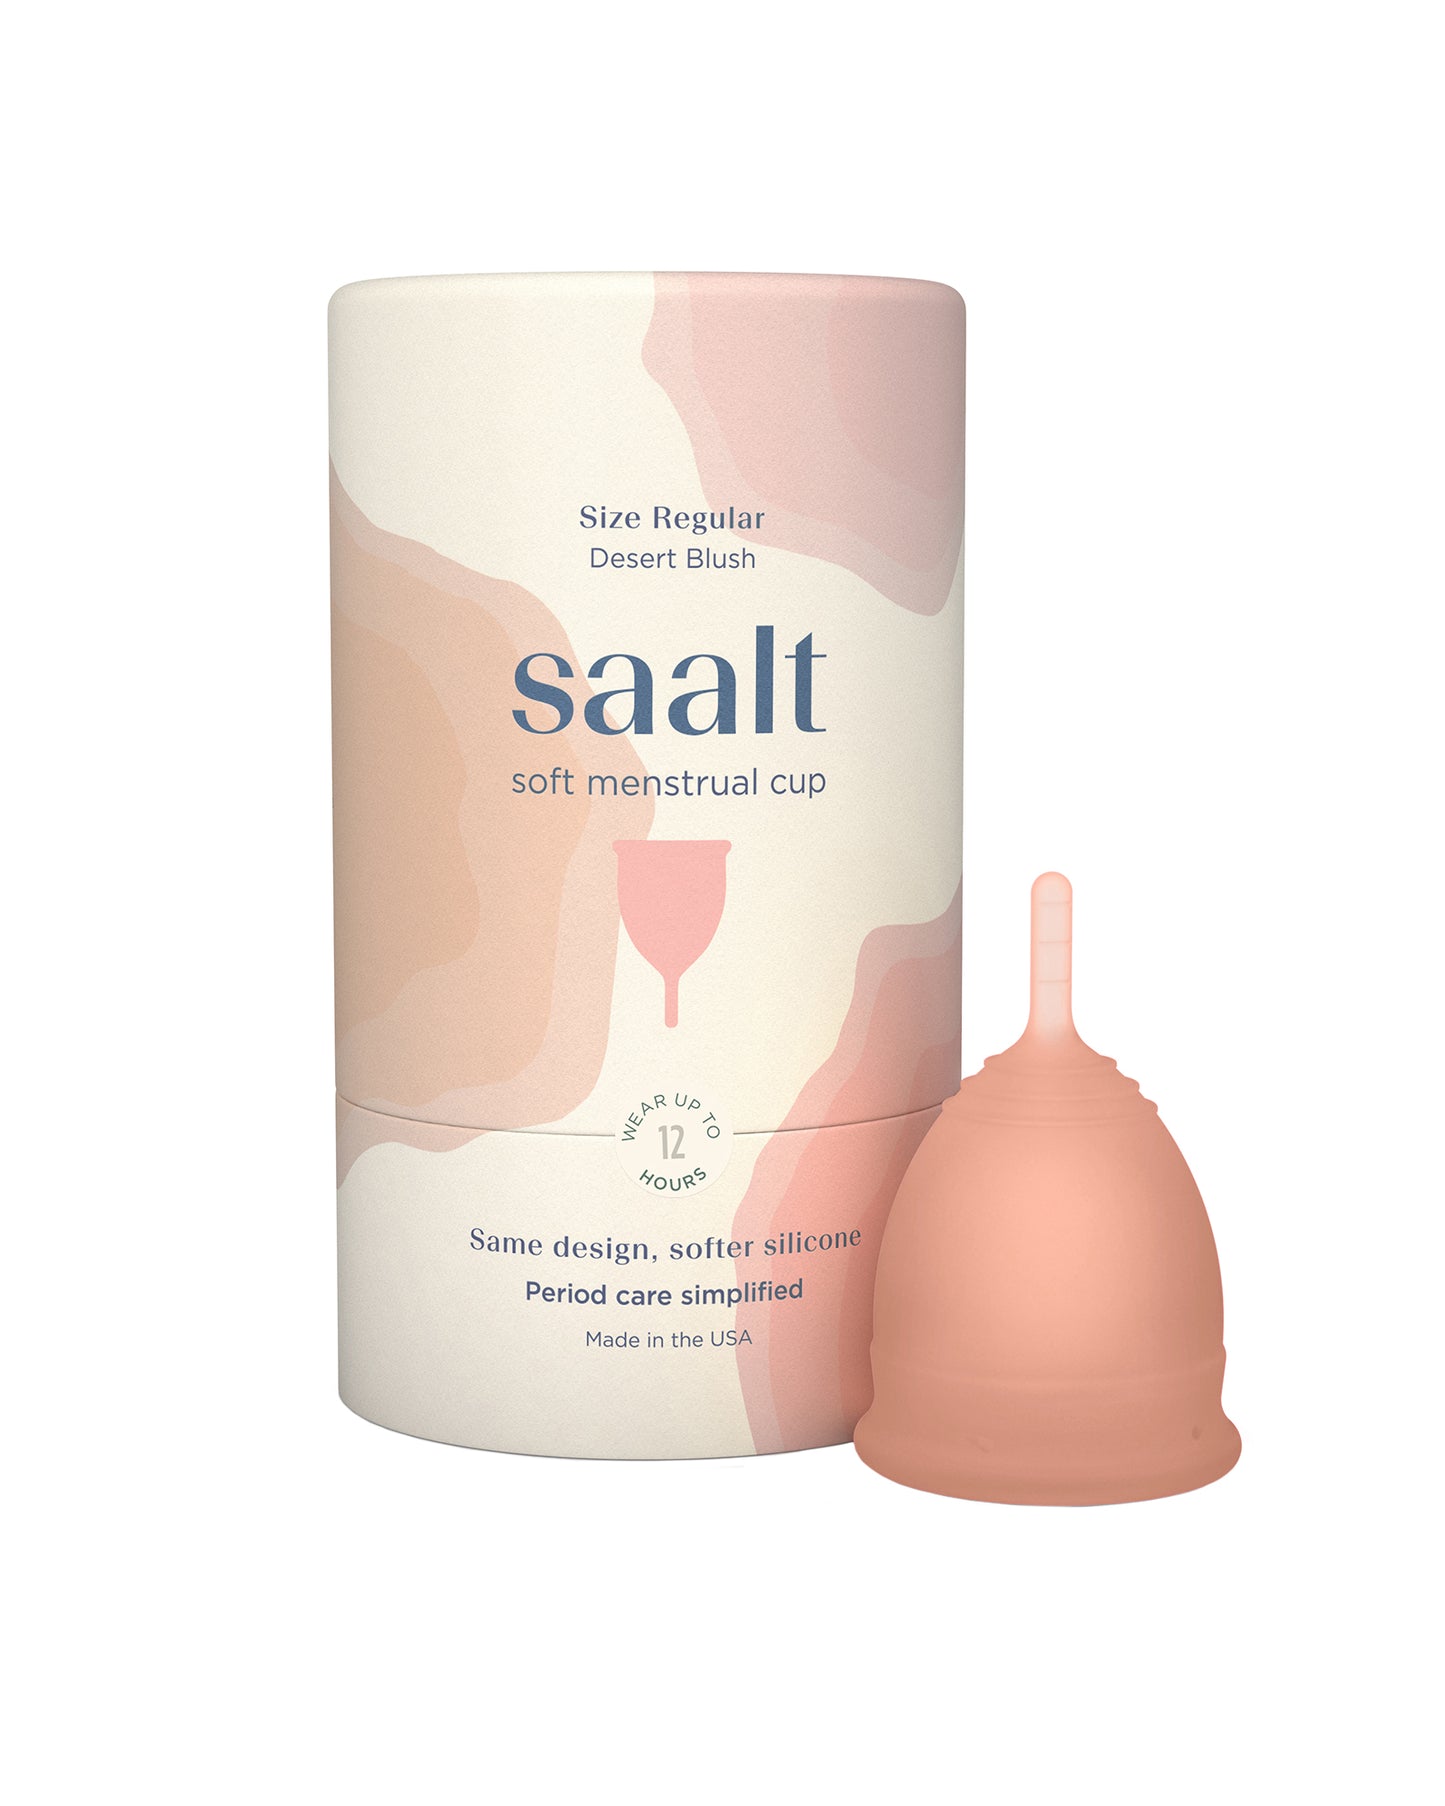 Soft Cup Wash  Menstrual Cup Cleanser for Silicone Period Cups